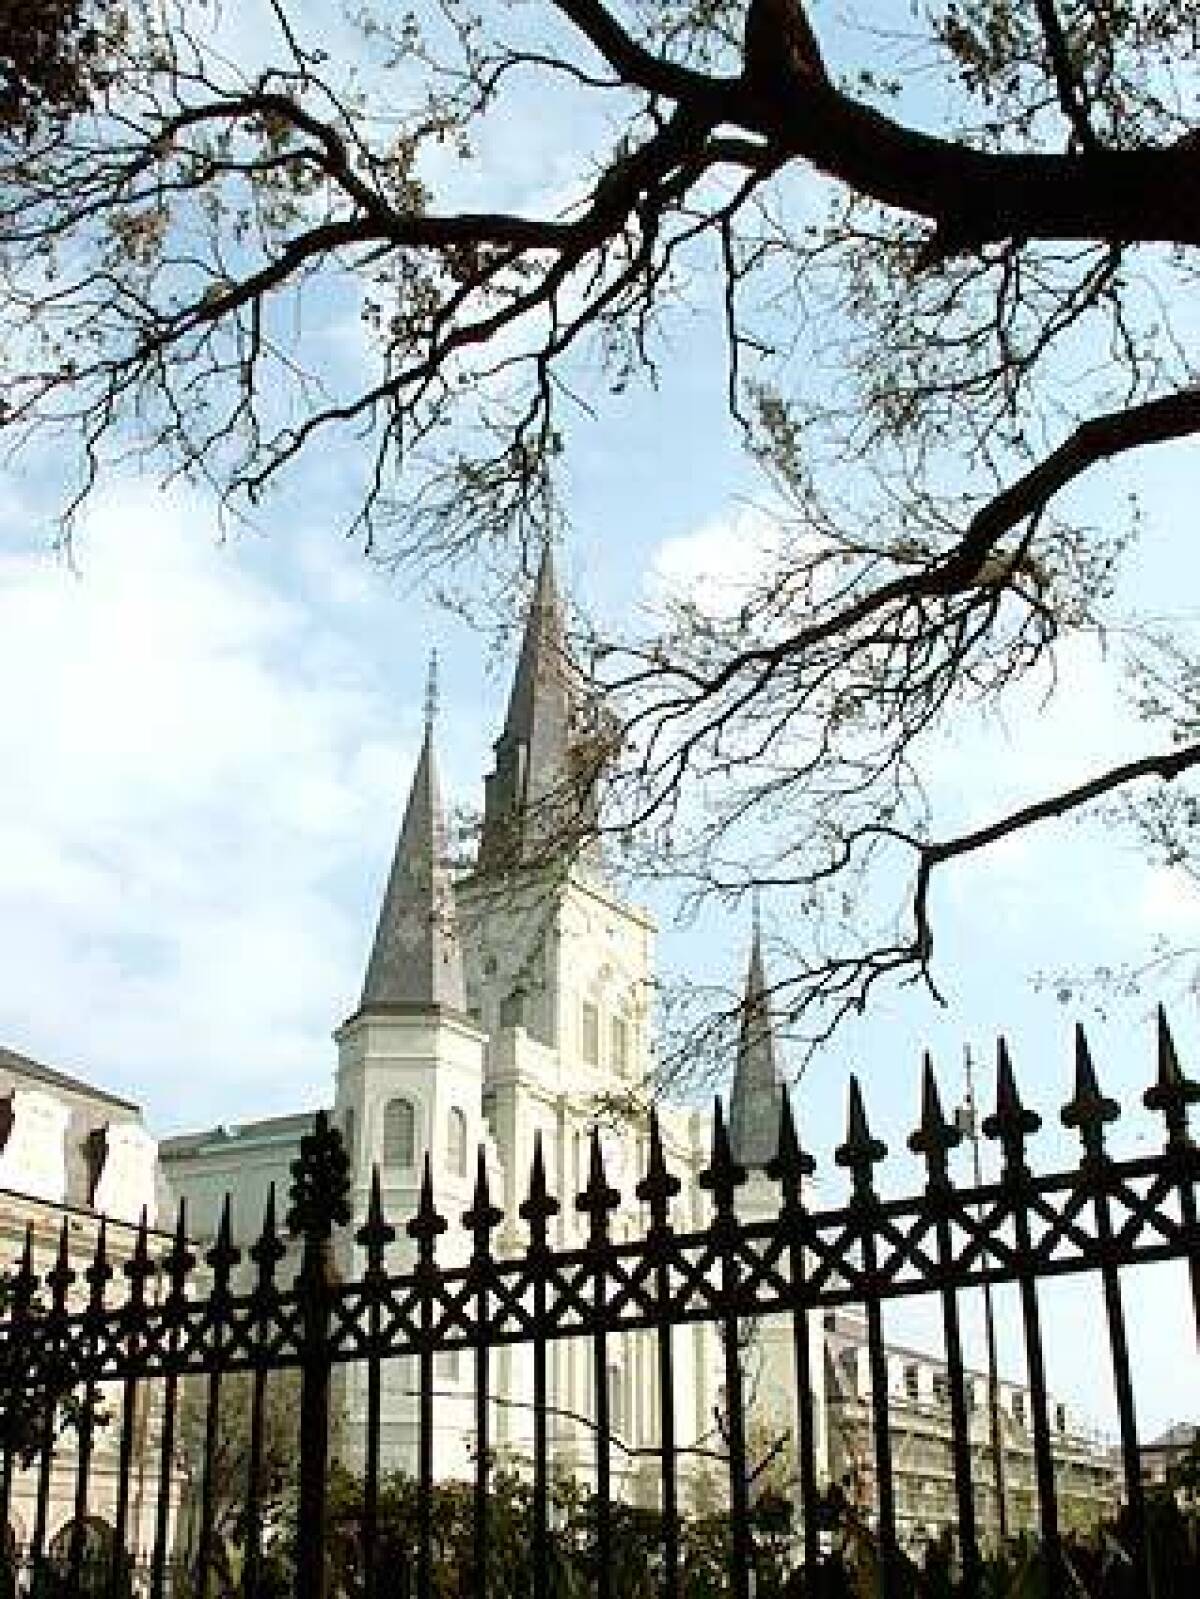 St. Louis Cathedral appears to have weathered the storm in New Orleans French Quarter. But Hurricane Katrinas powerful winds stripped trees bare.